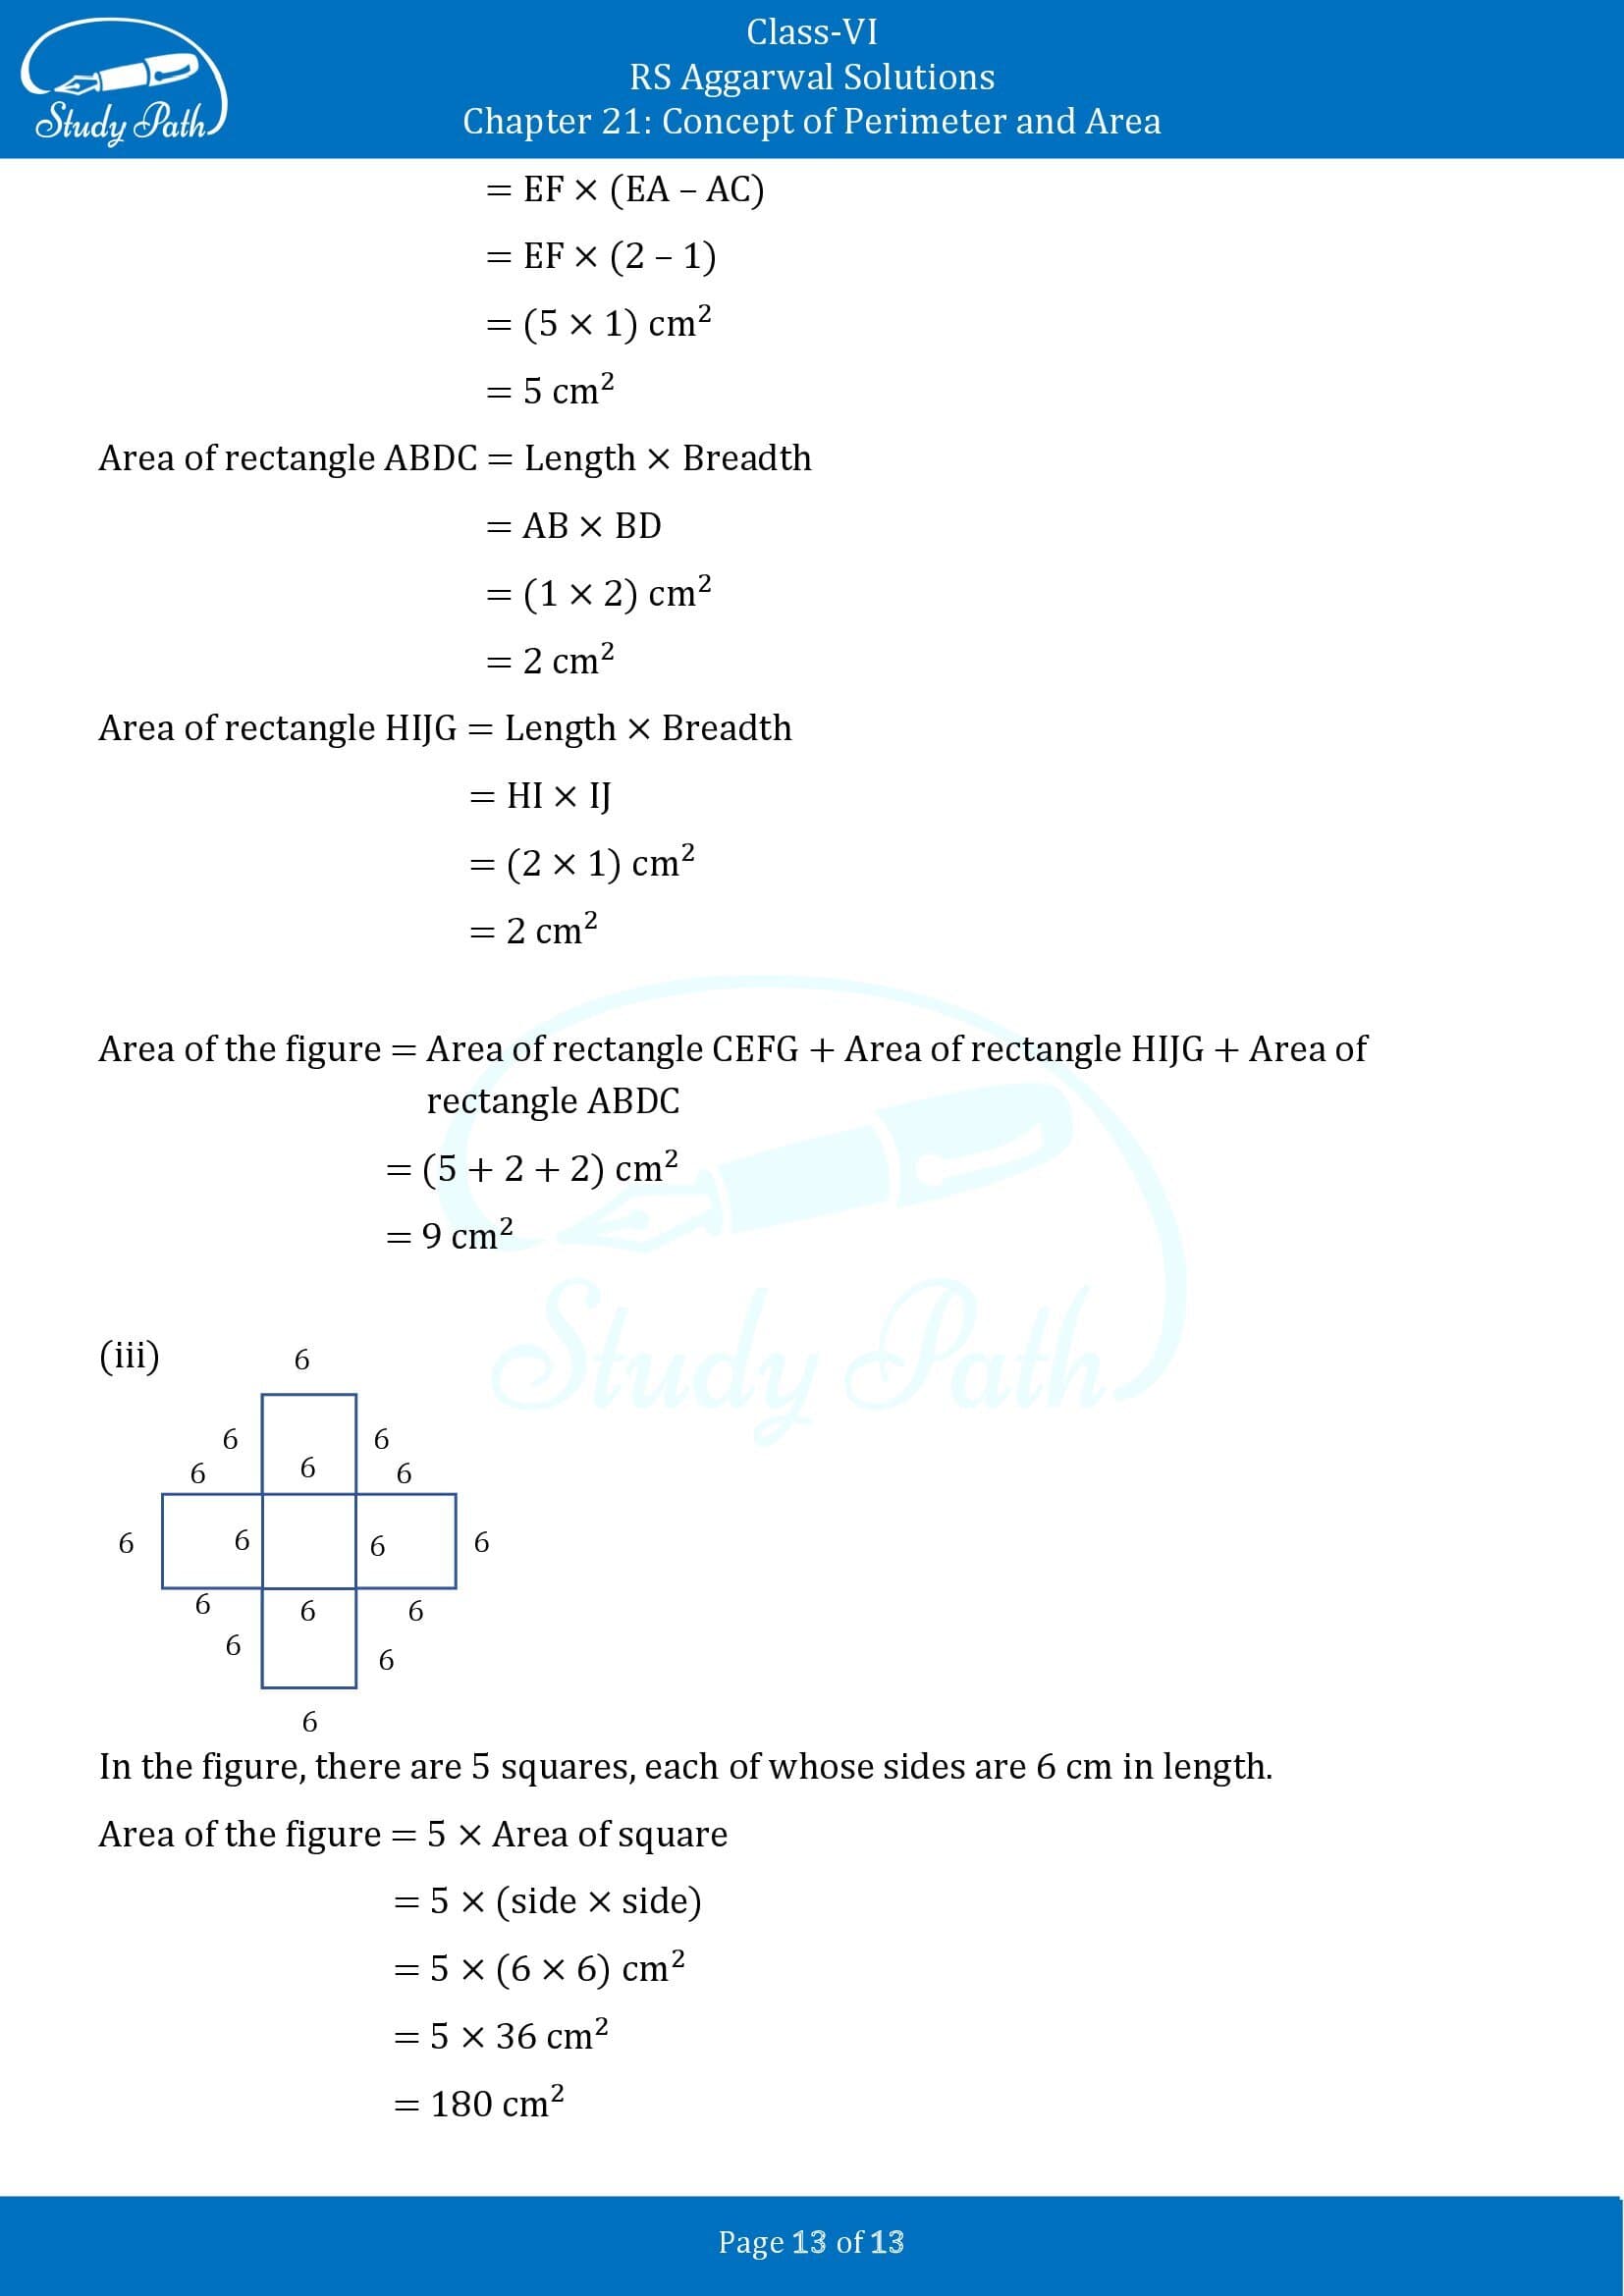 RS Aggarwal Solutions Class 6 Chapter 21 Concept of Perimeter and Area Exercise 21D 00013